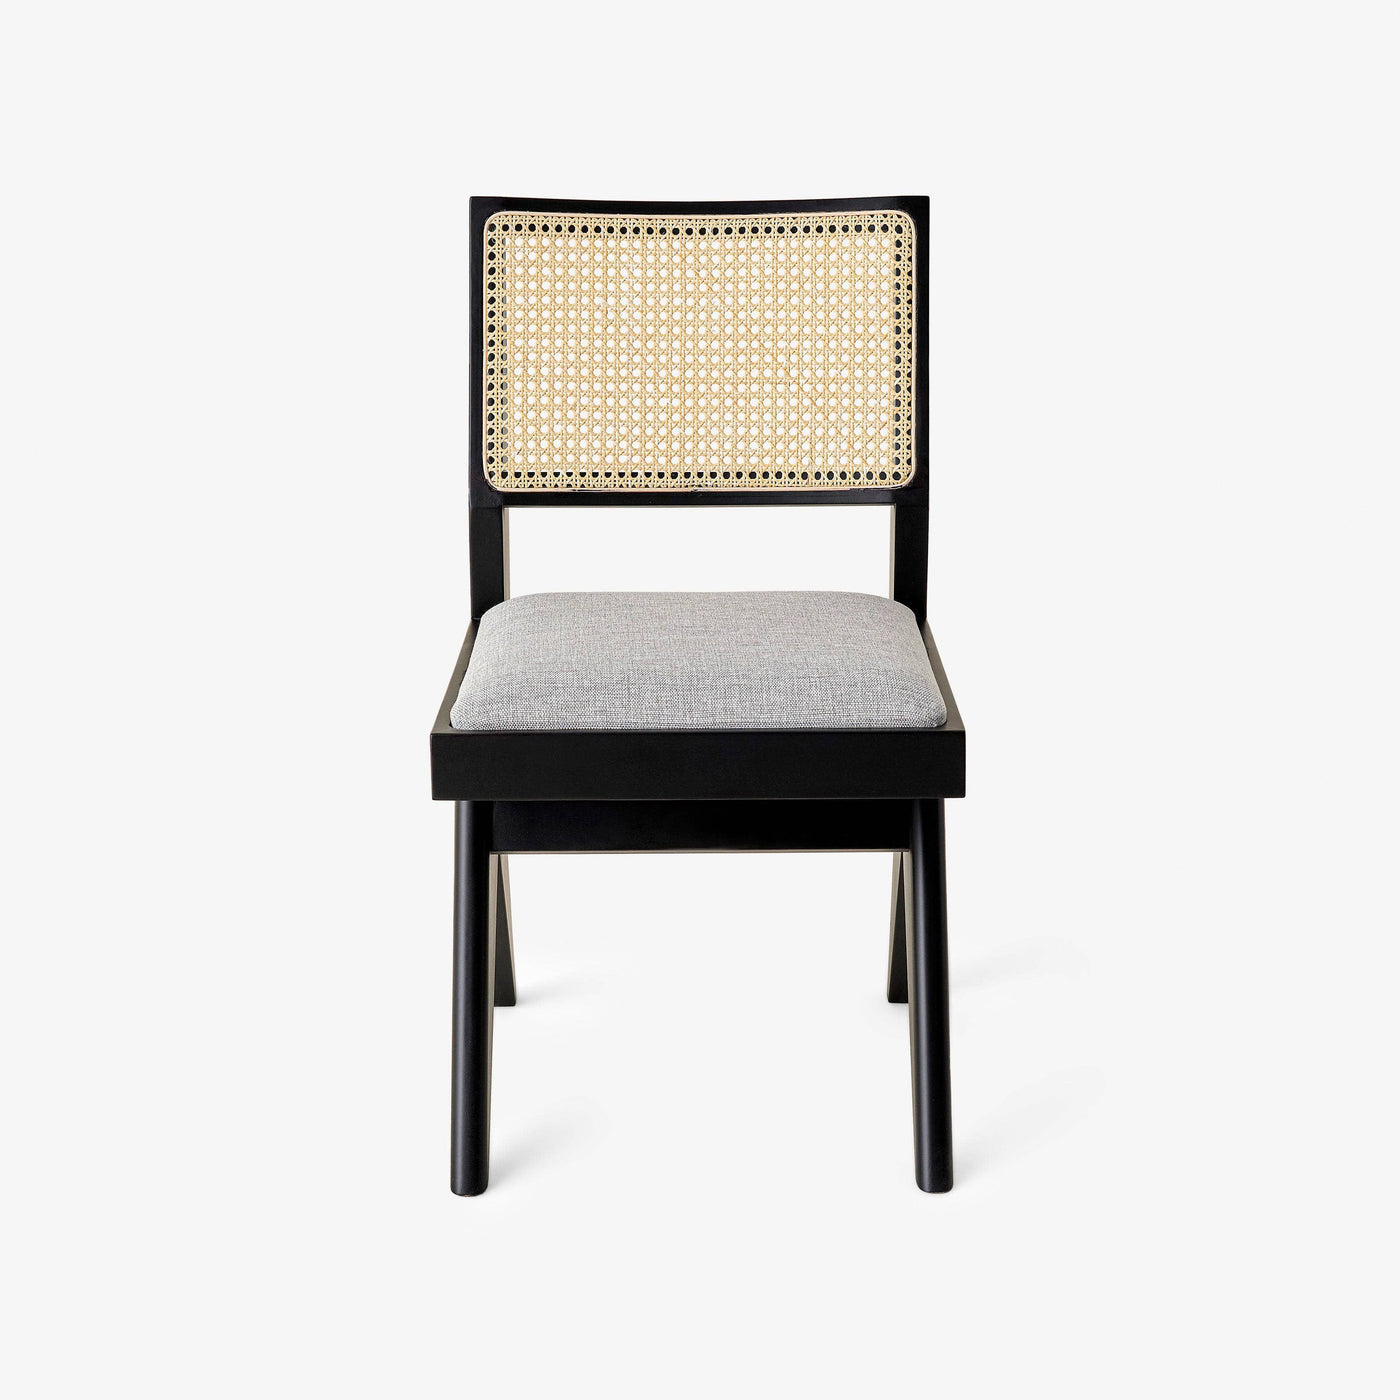 Lucca Rattan Accent Chair, Black - Light Grey 1